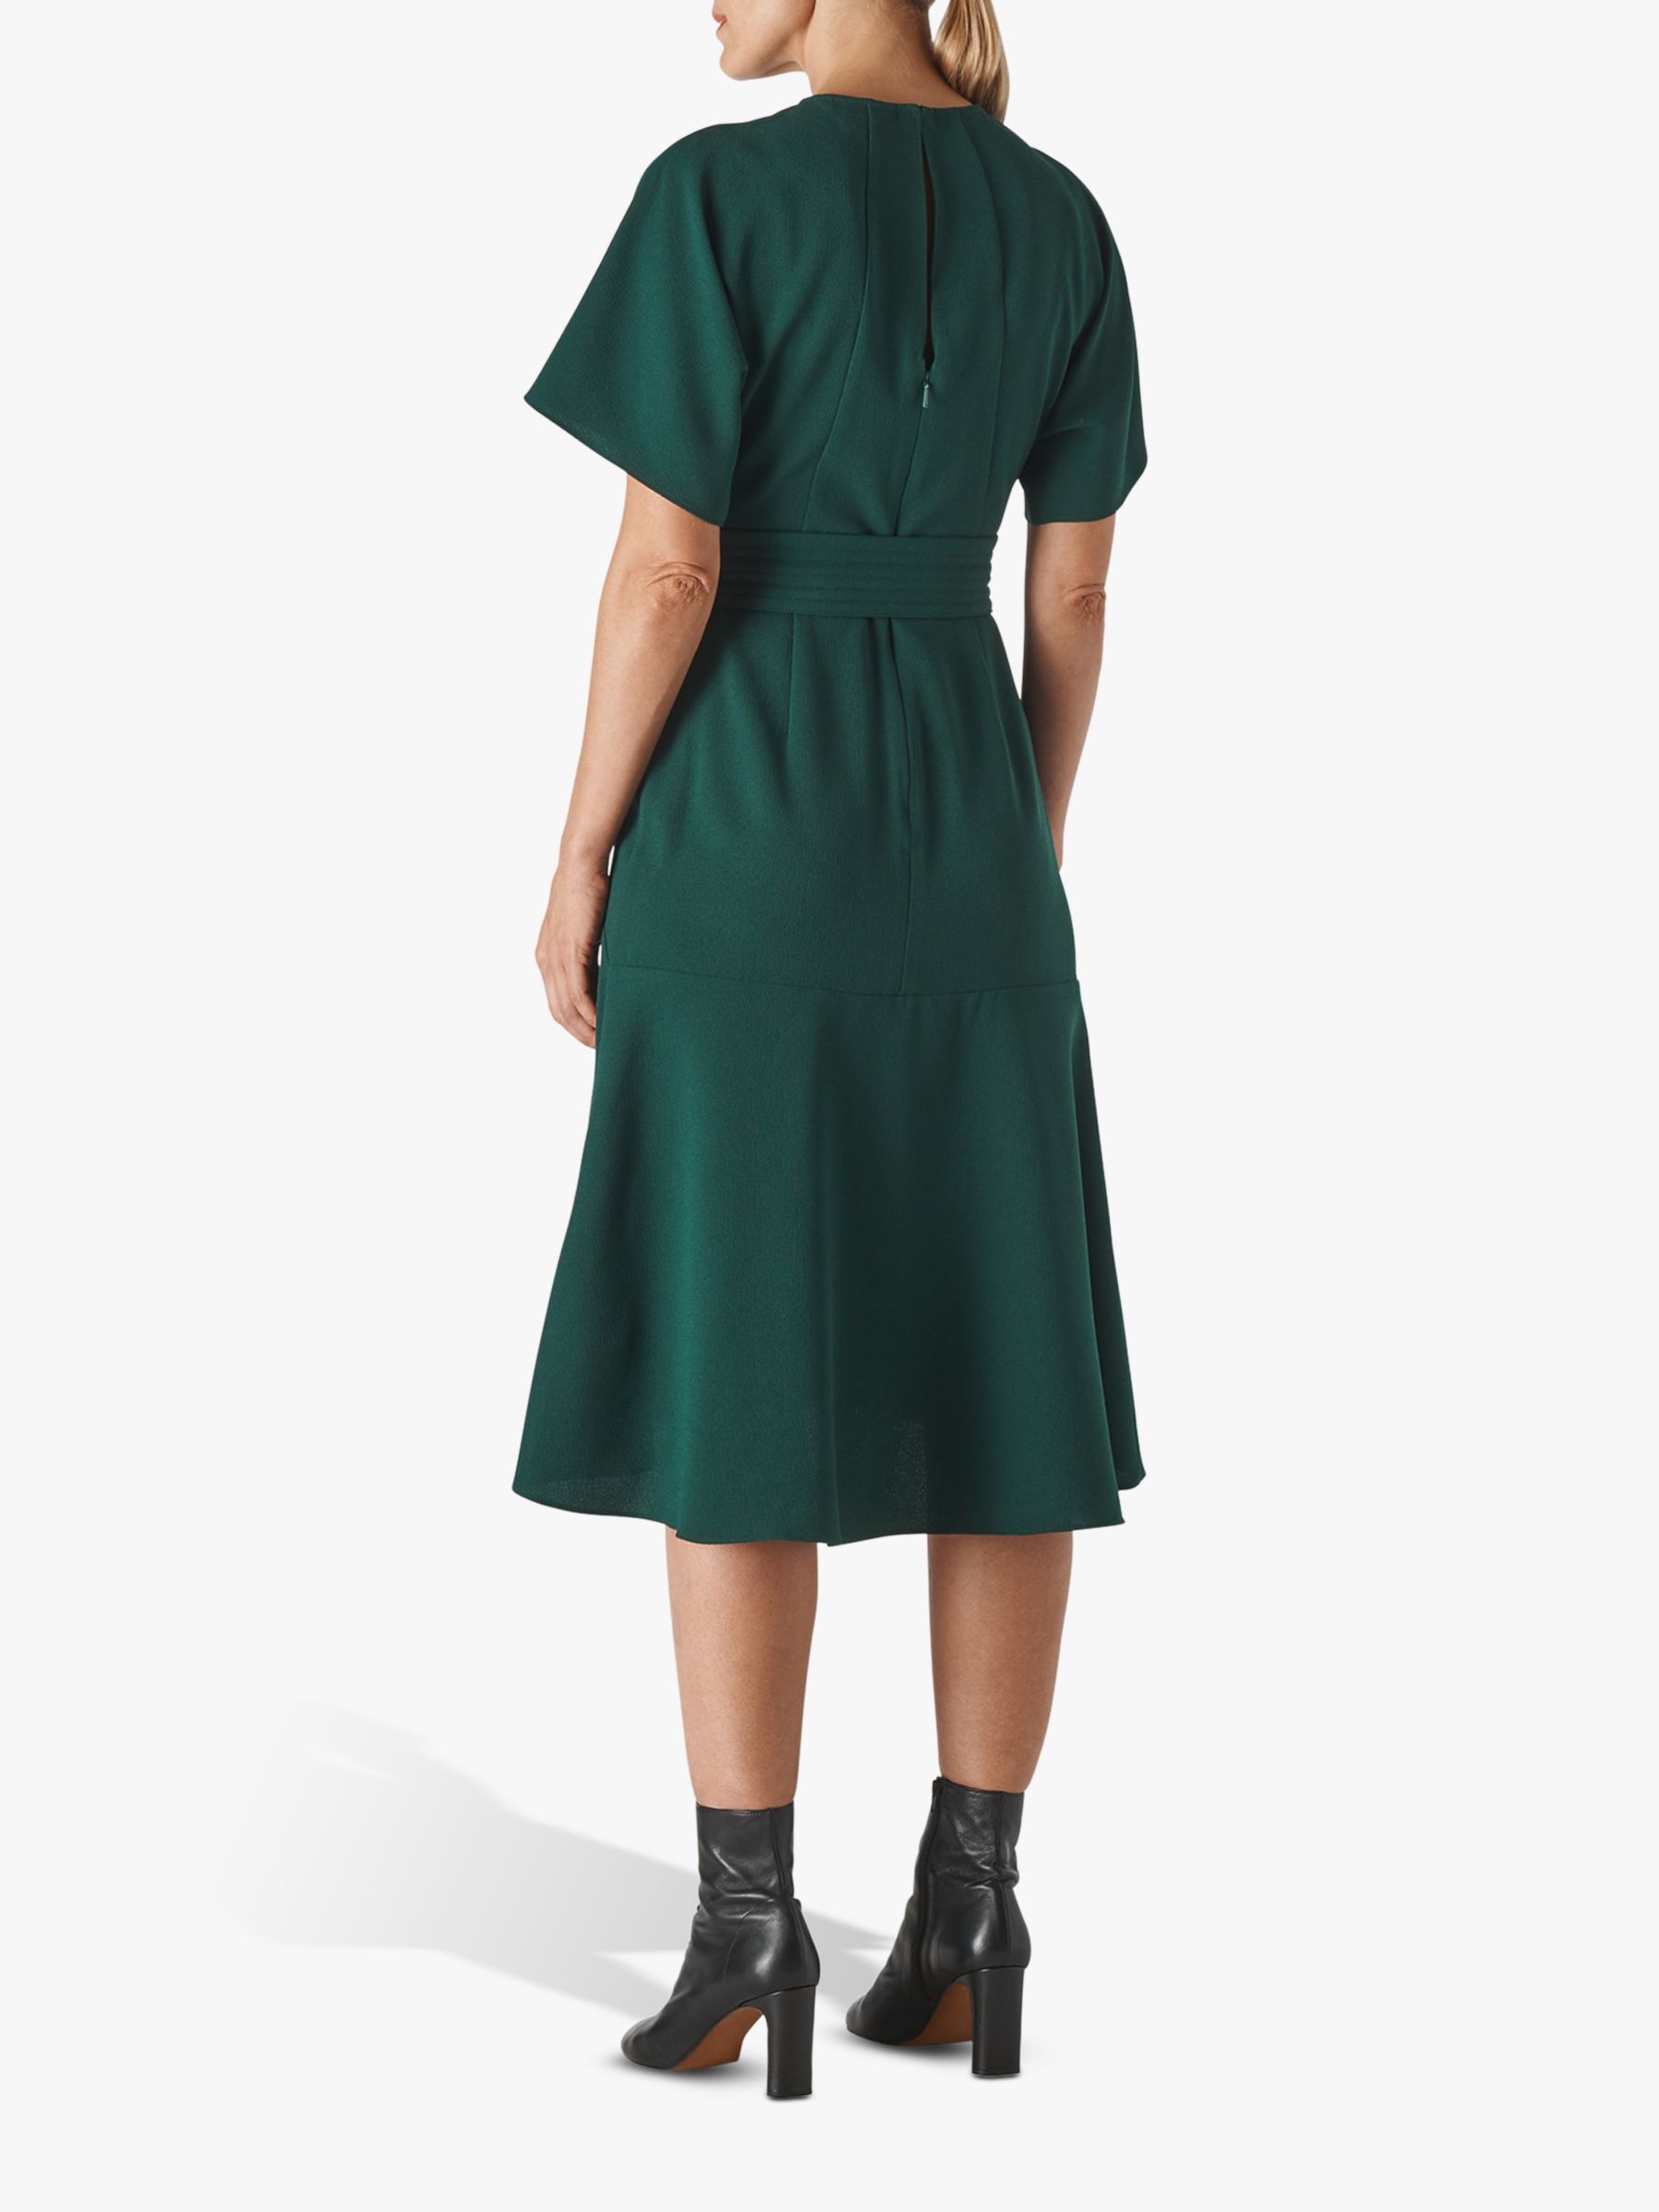 Whistles Belted Flared Midi Dress, Green at John Lewis & Partners